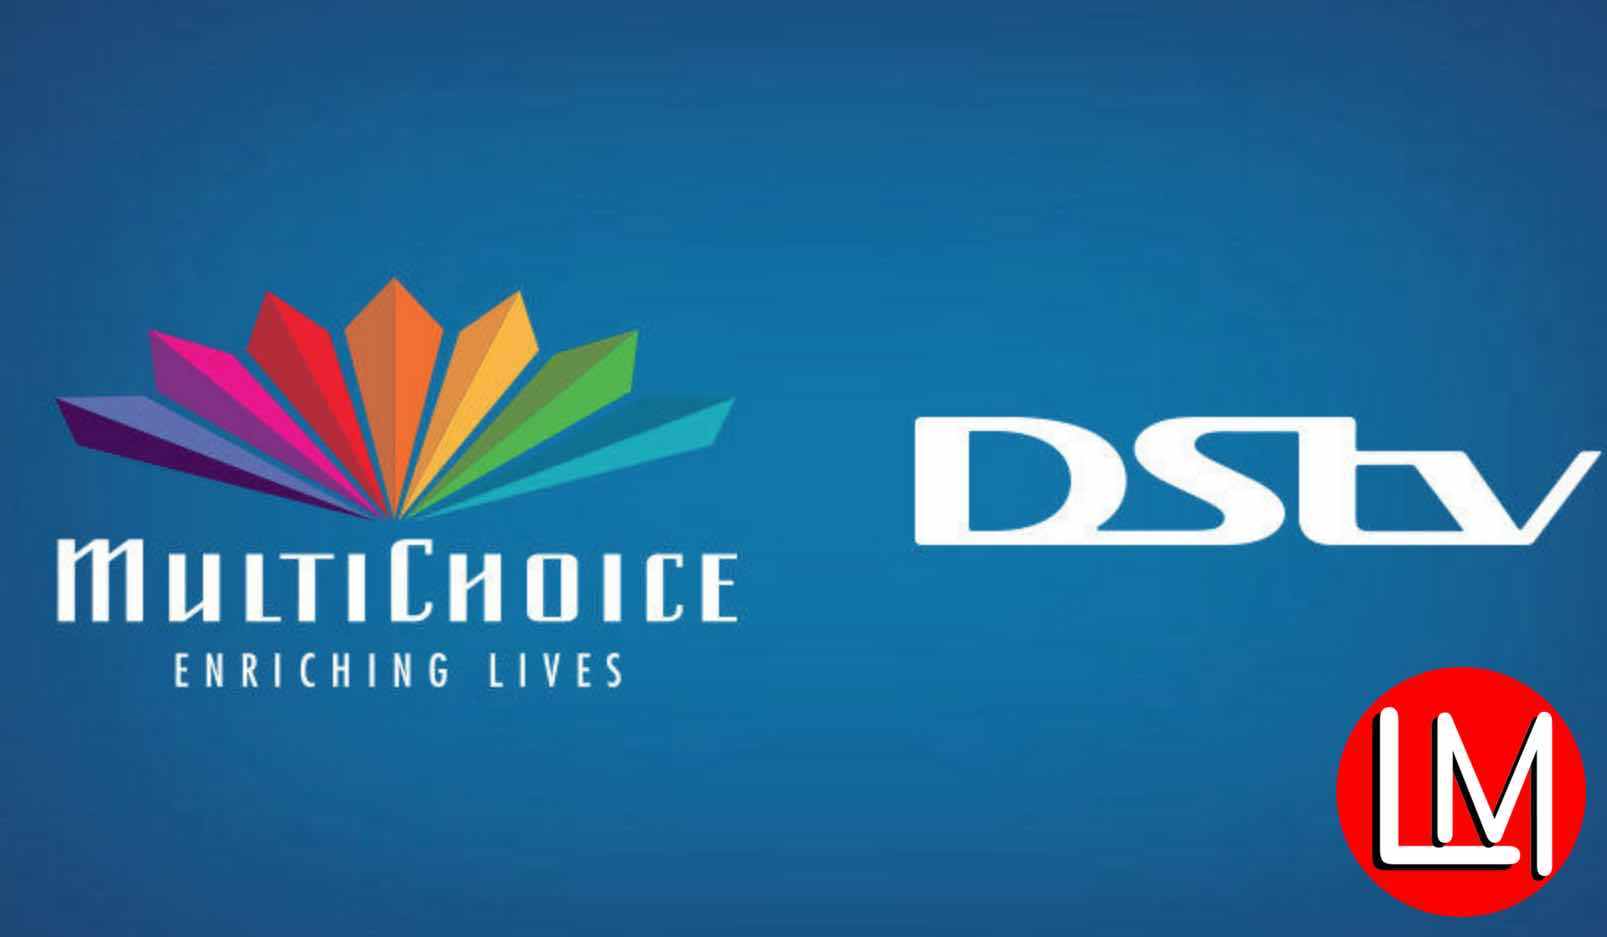 how to crack all dstv channels